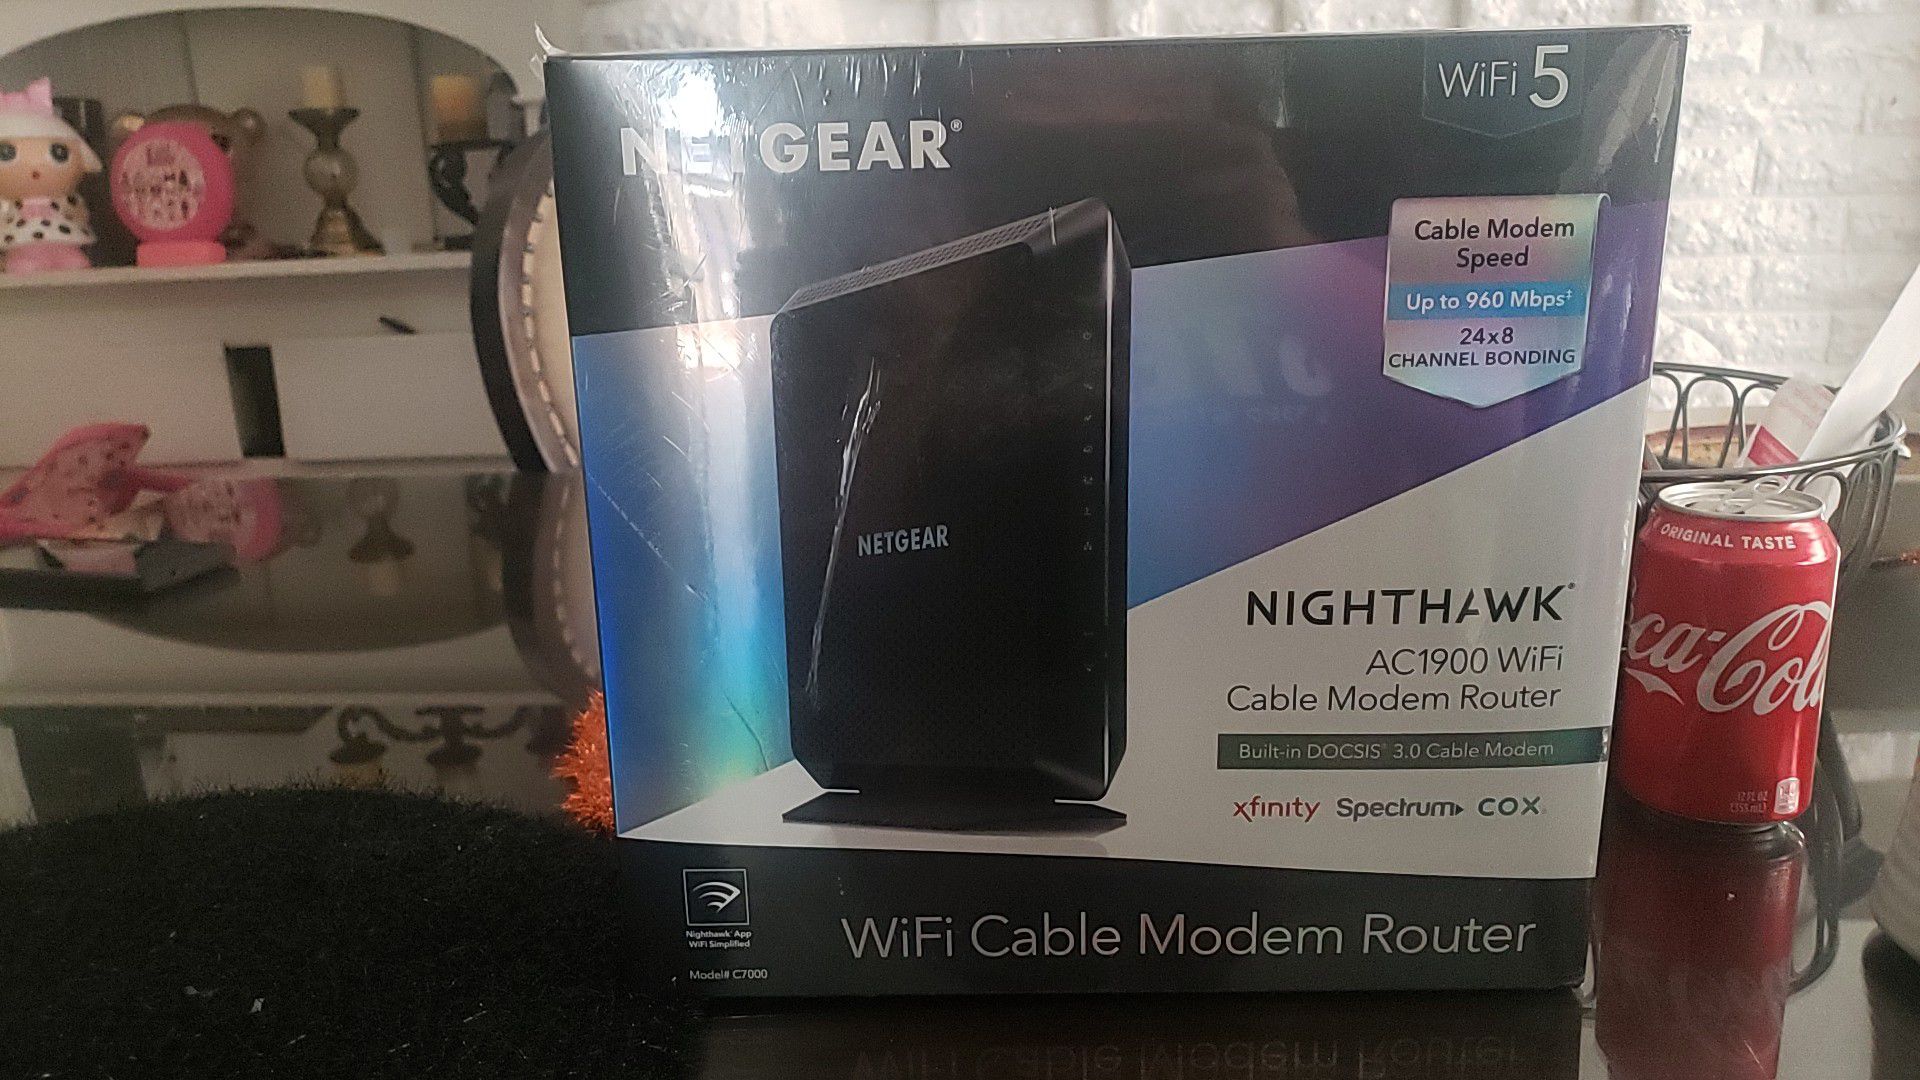 NIGHTHAWK AC1900 WIFI Cable Modem Router